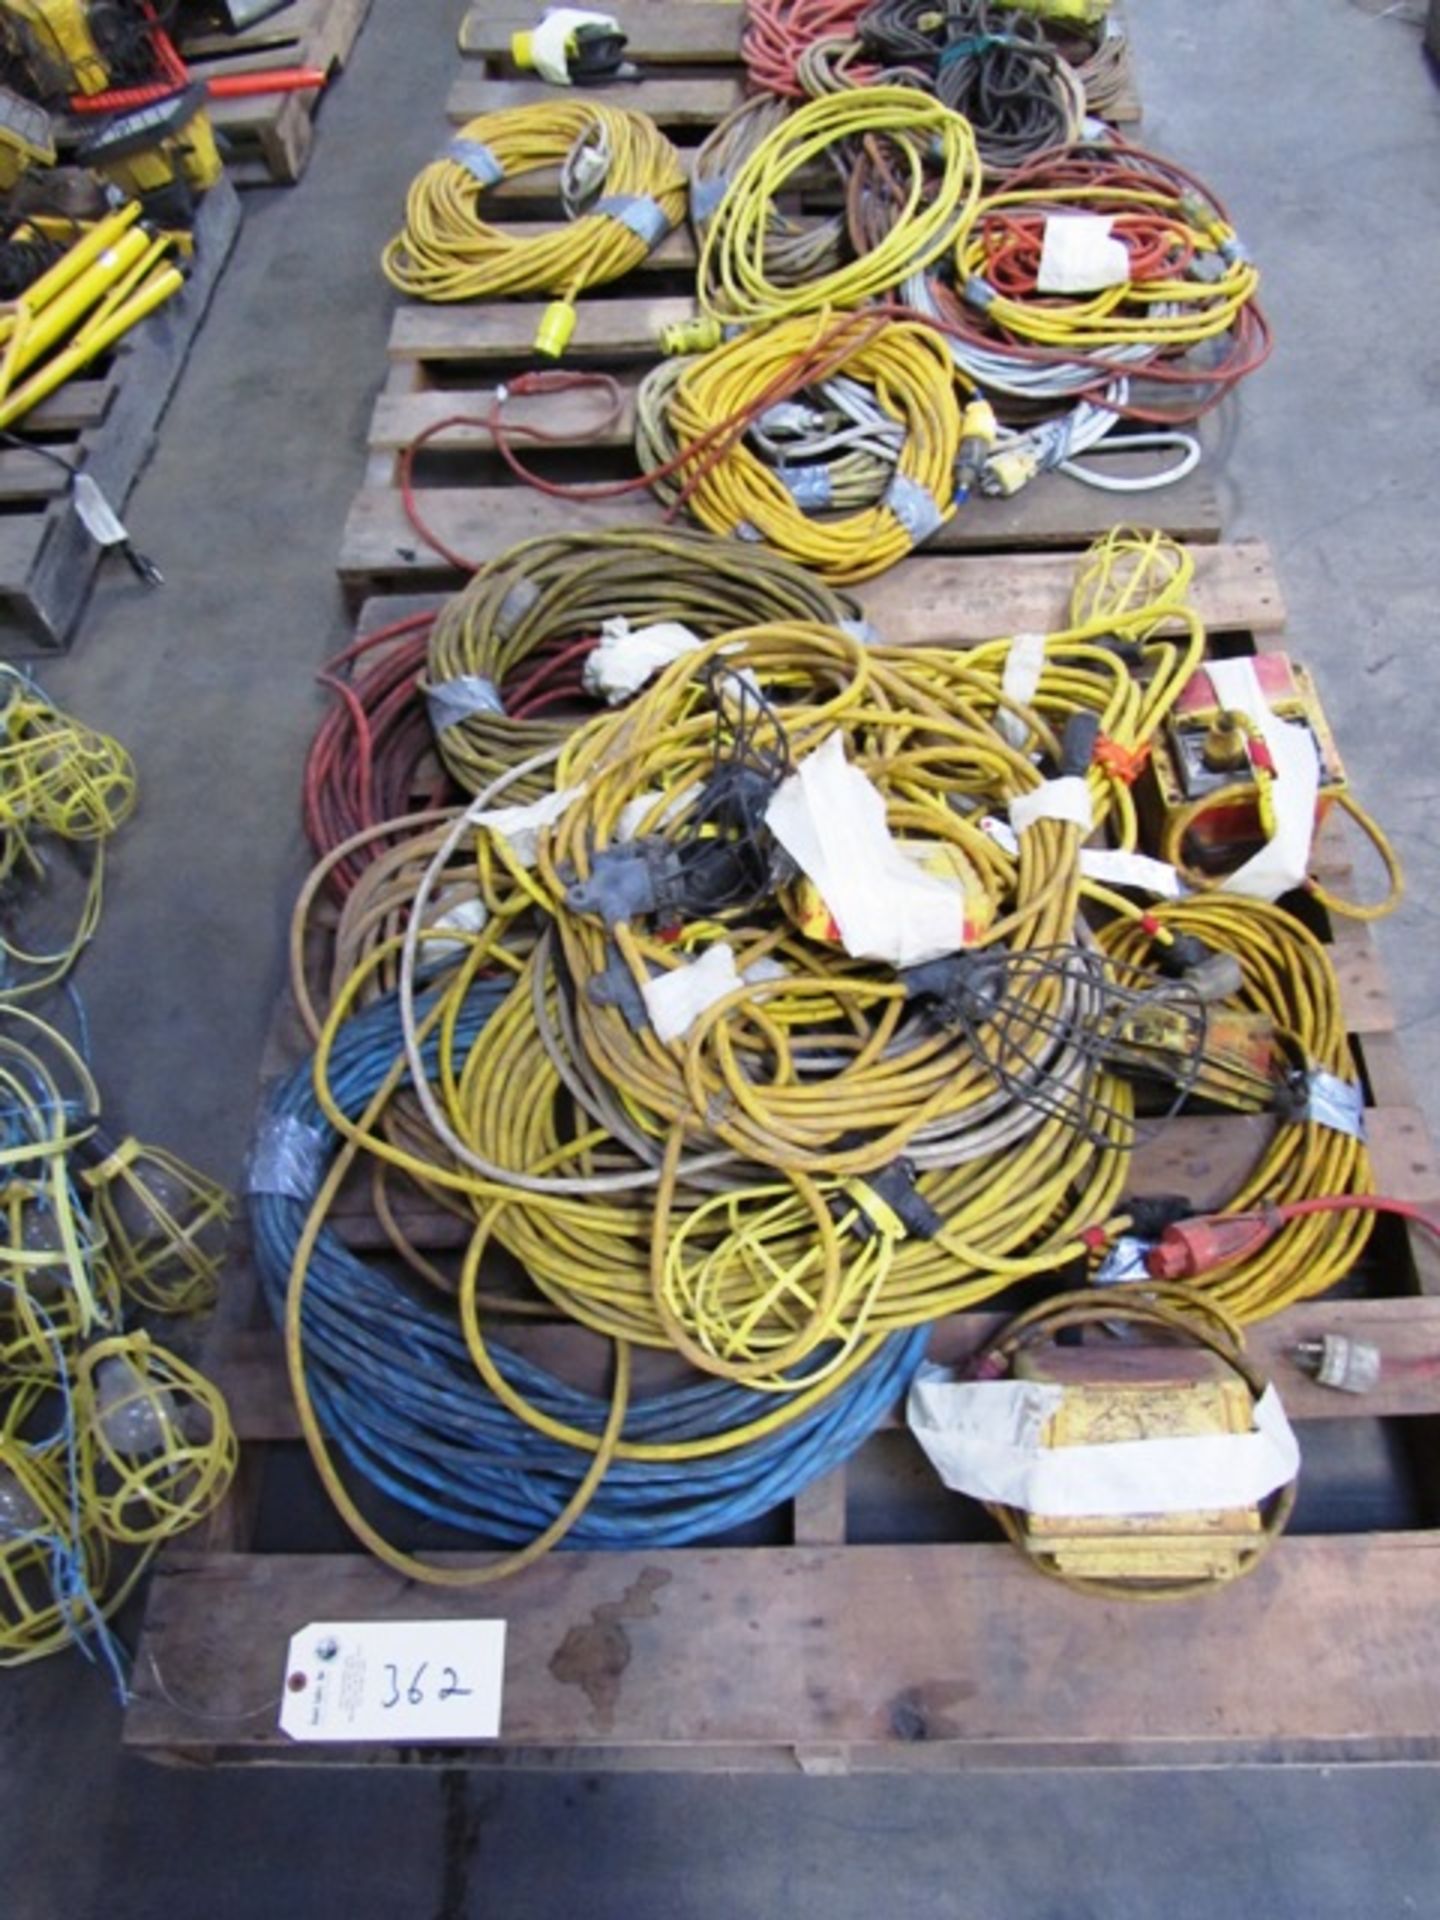 Extension Cords (on (2) pallets)